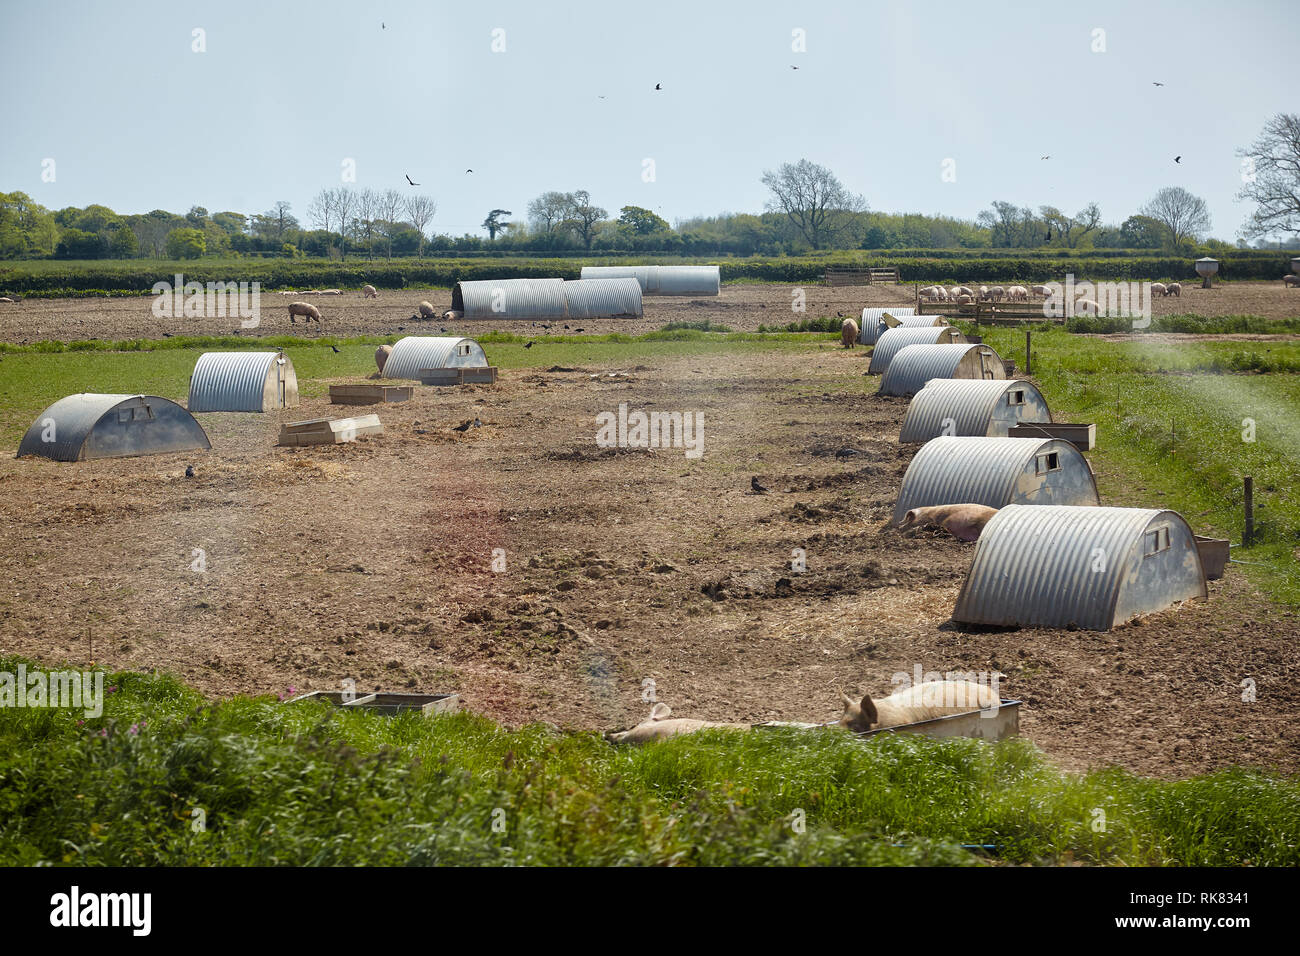 The view of the pigs near the pig ark on the outdoor pig unit in Devon. England Stock Photo